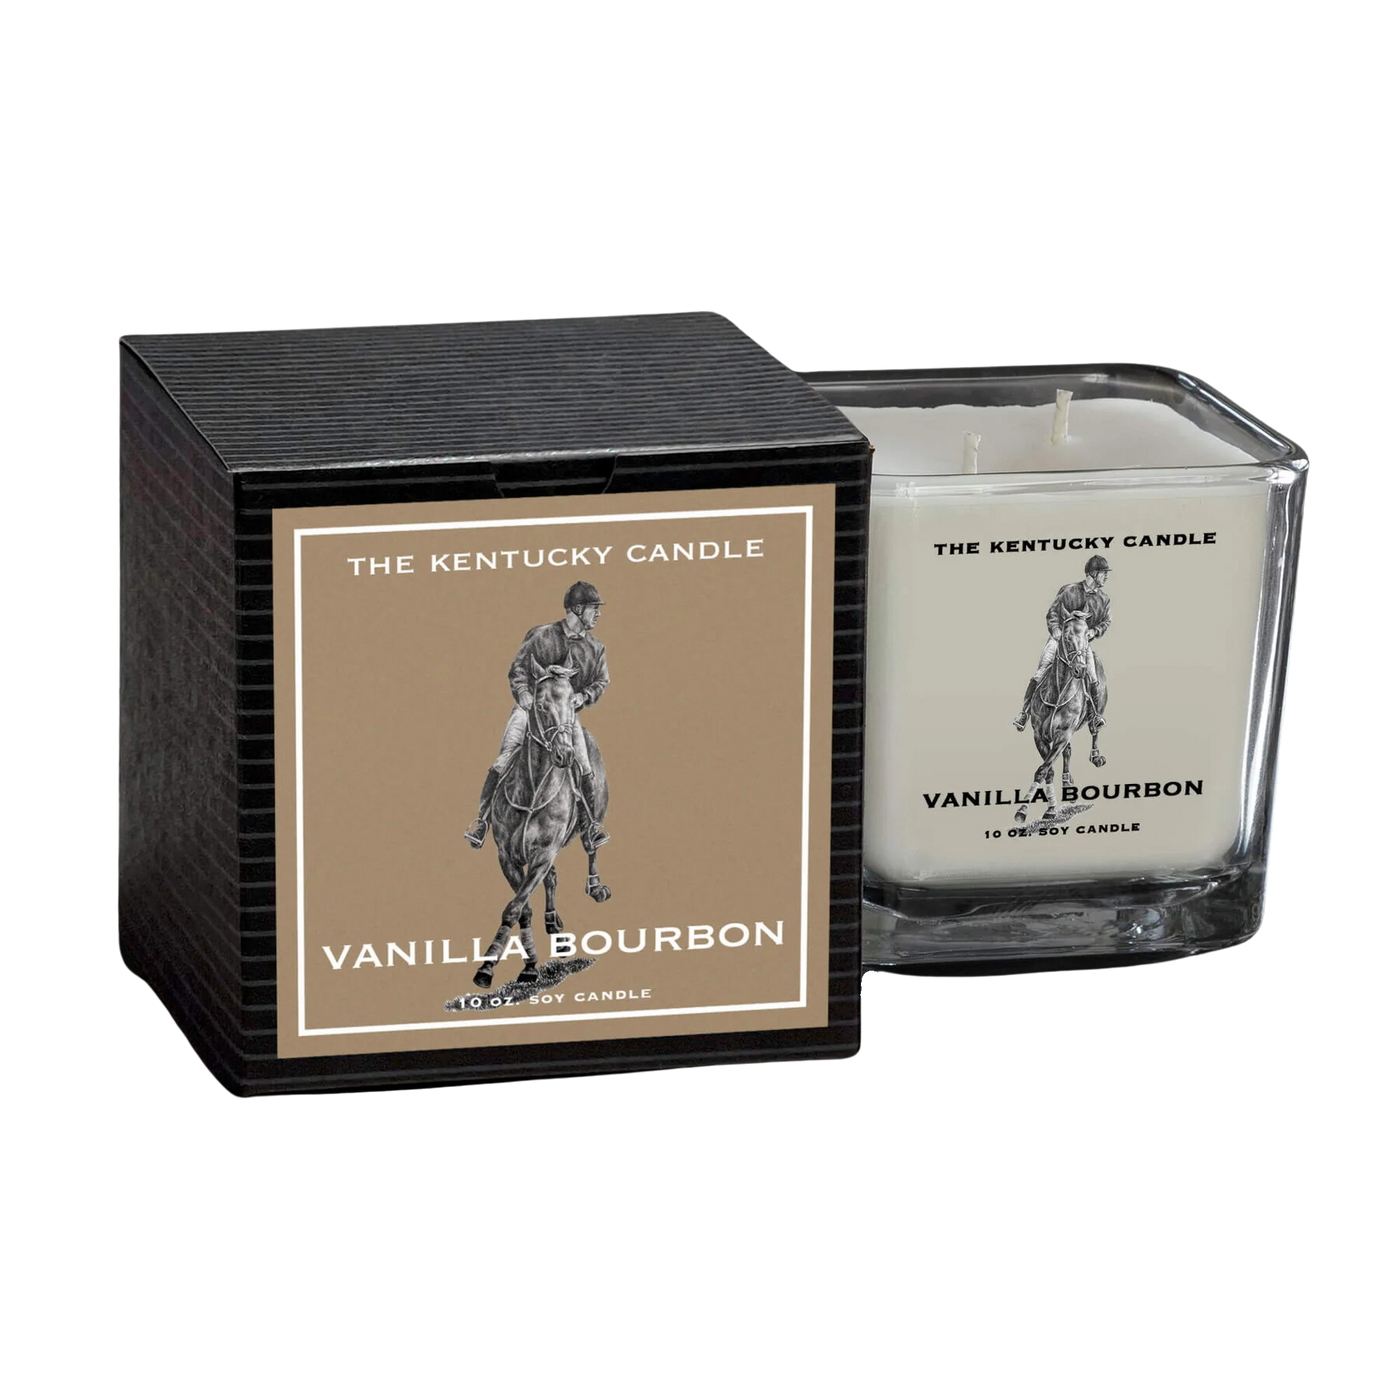 The Kentucky Candle by Brownstone Candle Company- Vanilla Bourbon